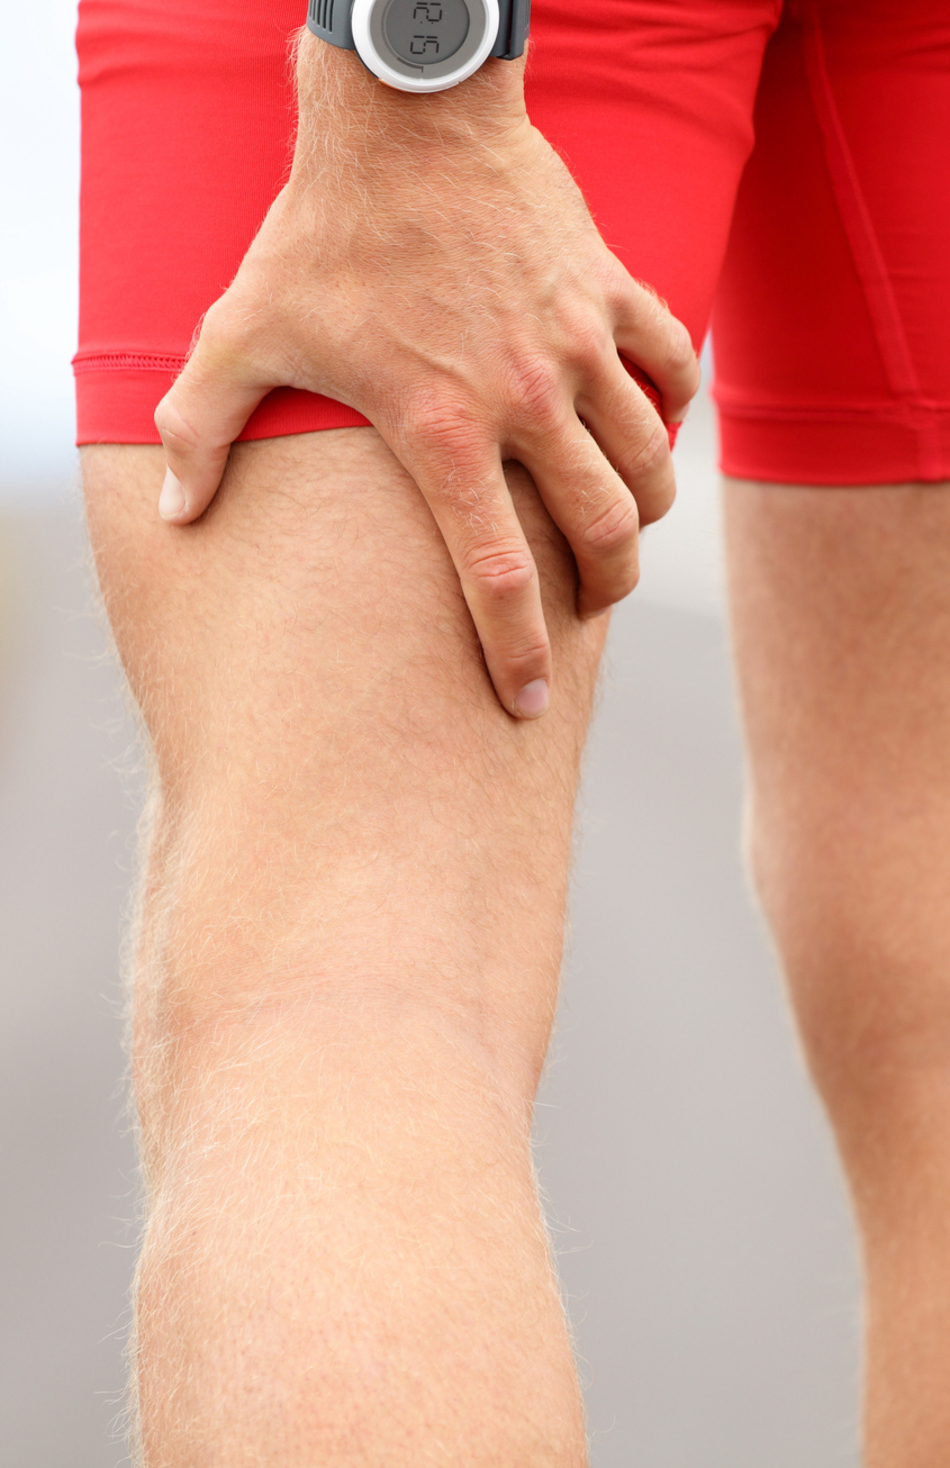 Healing a Pulled Hamstring